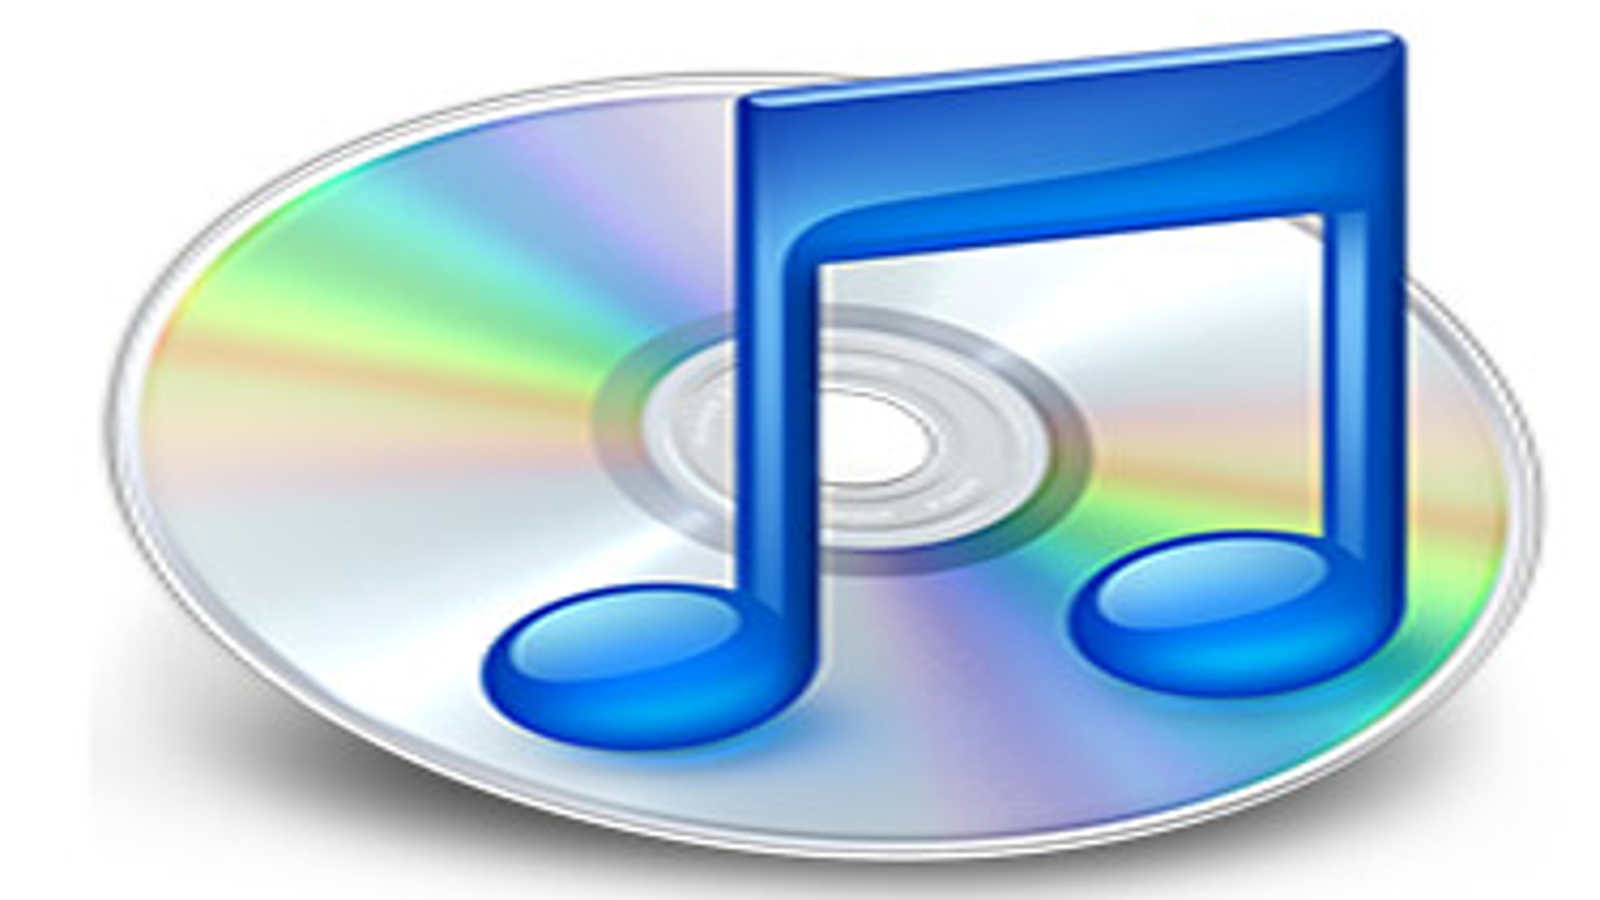 install itunes on pc